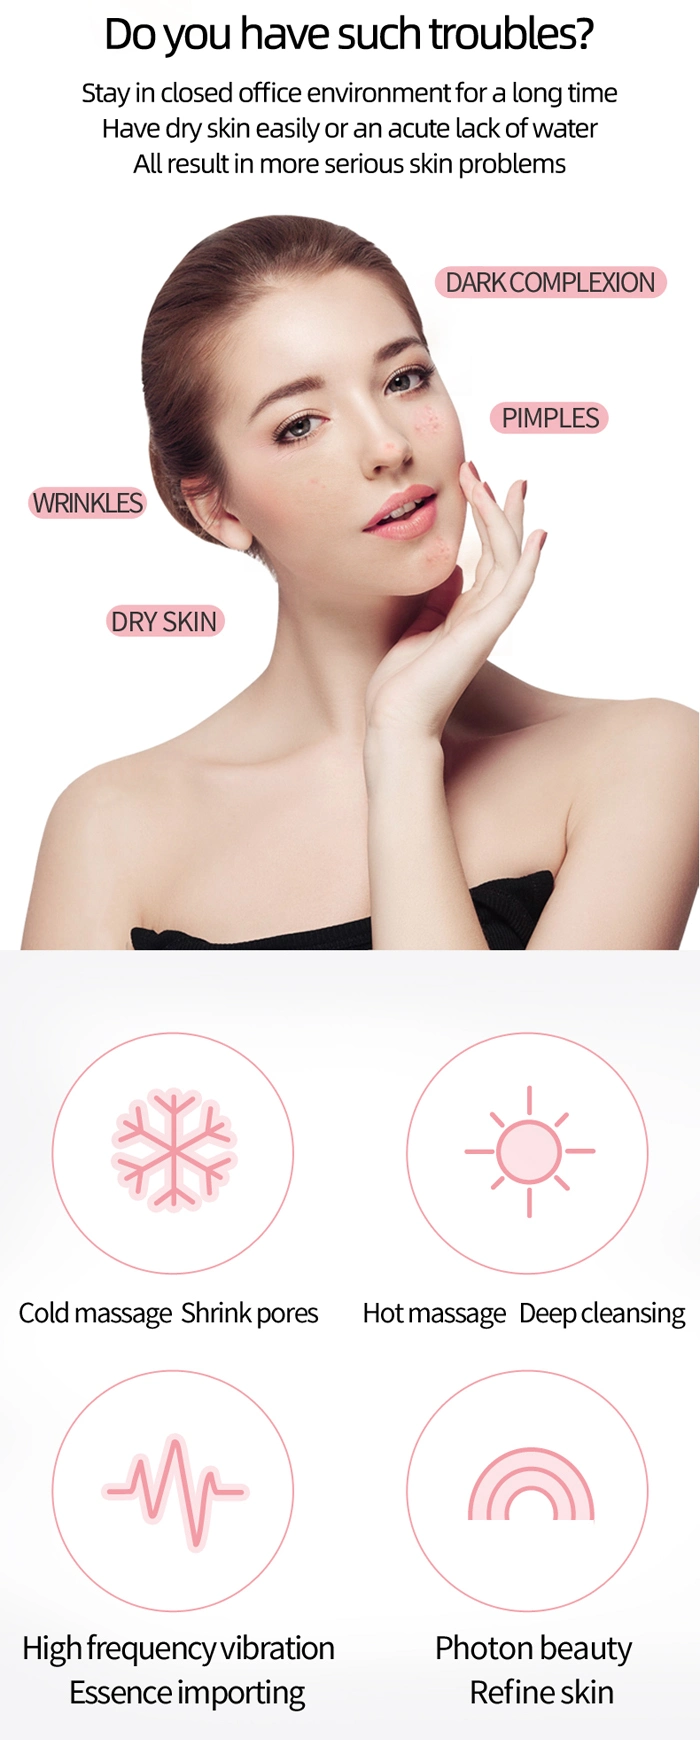 Beauty Home Skin Lifting Beauty Hot and Cold Vibration Device